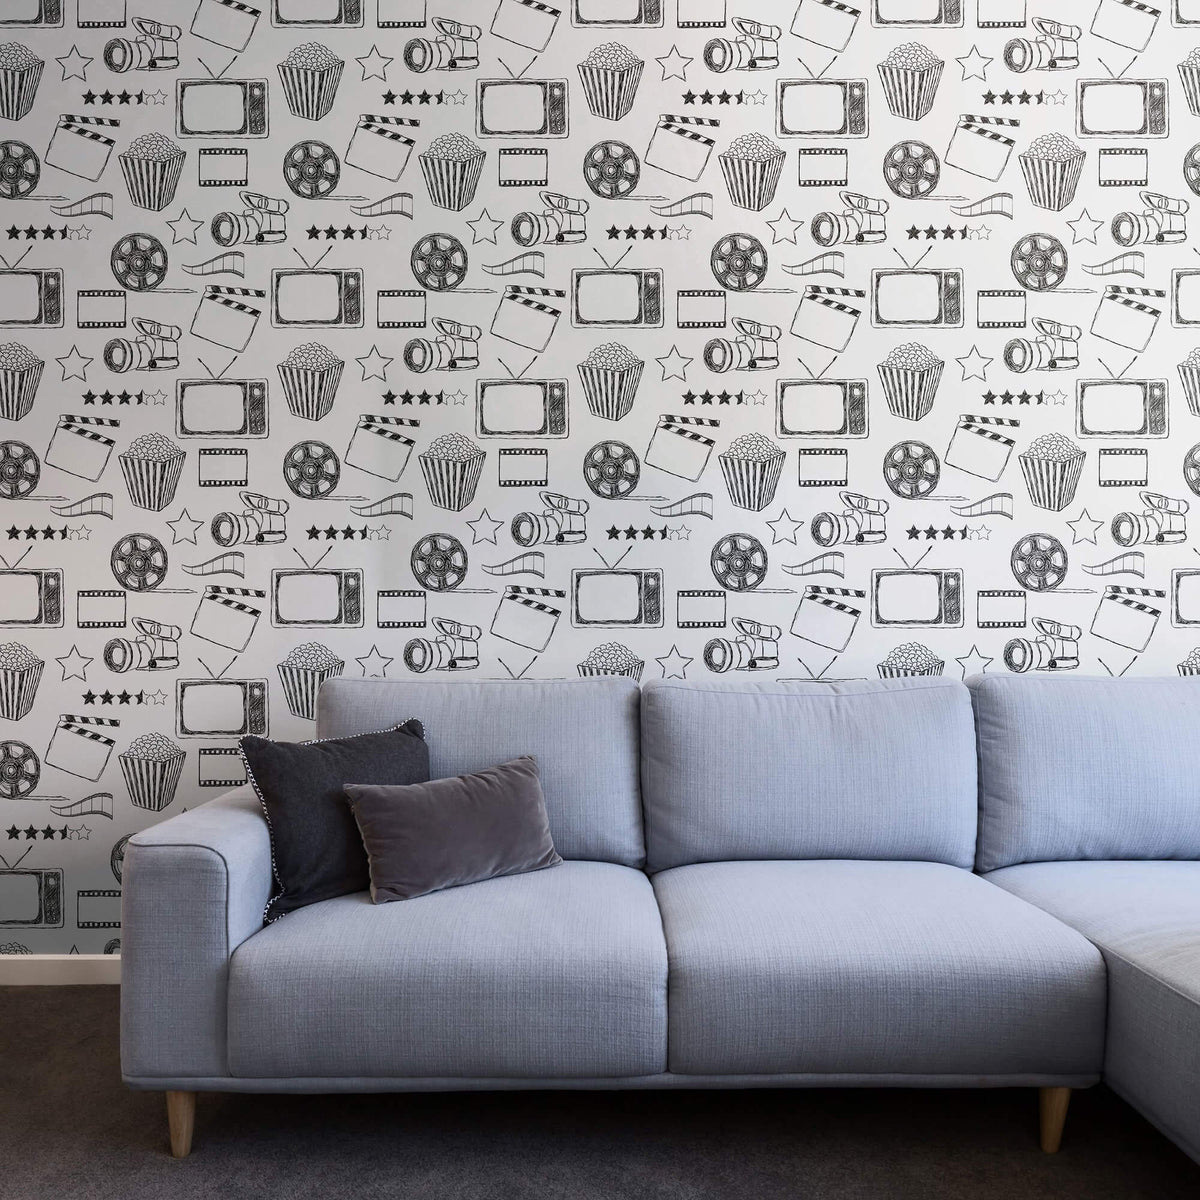 White Vintage Themed Removable Wallpaper